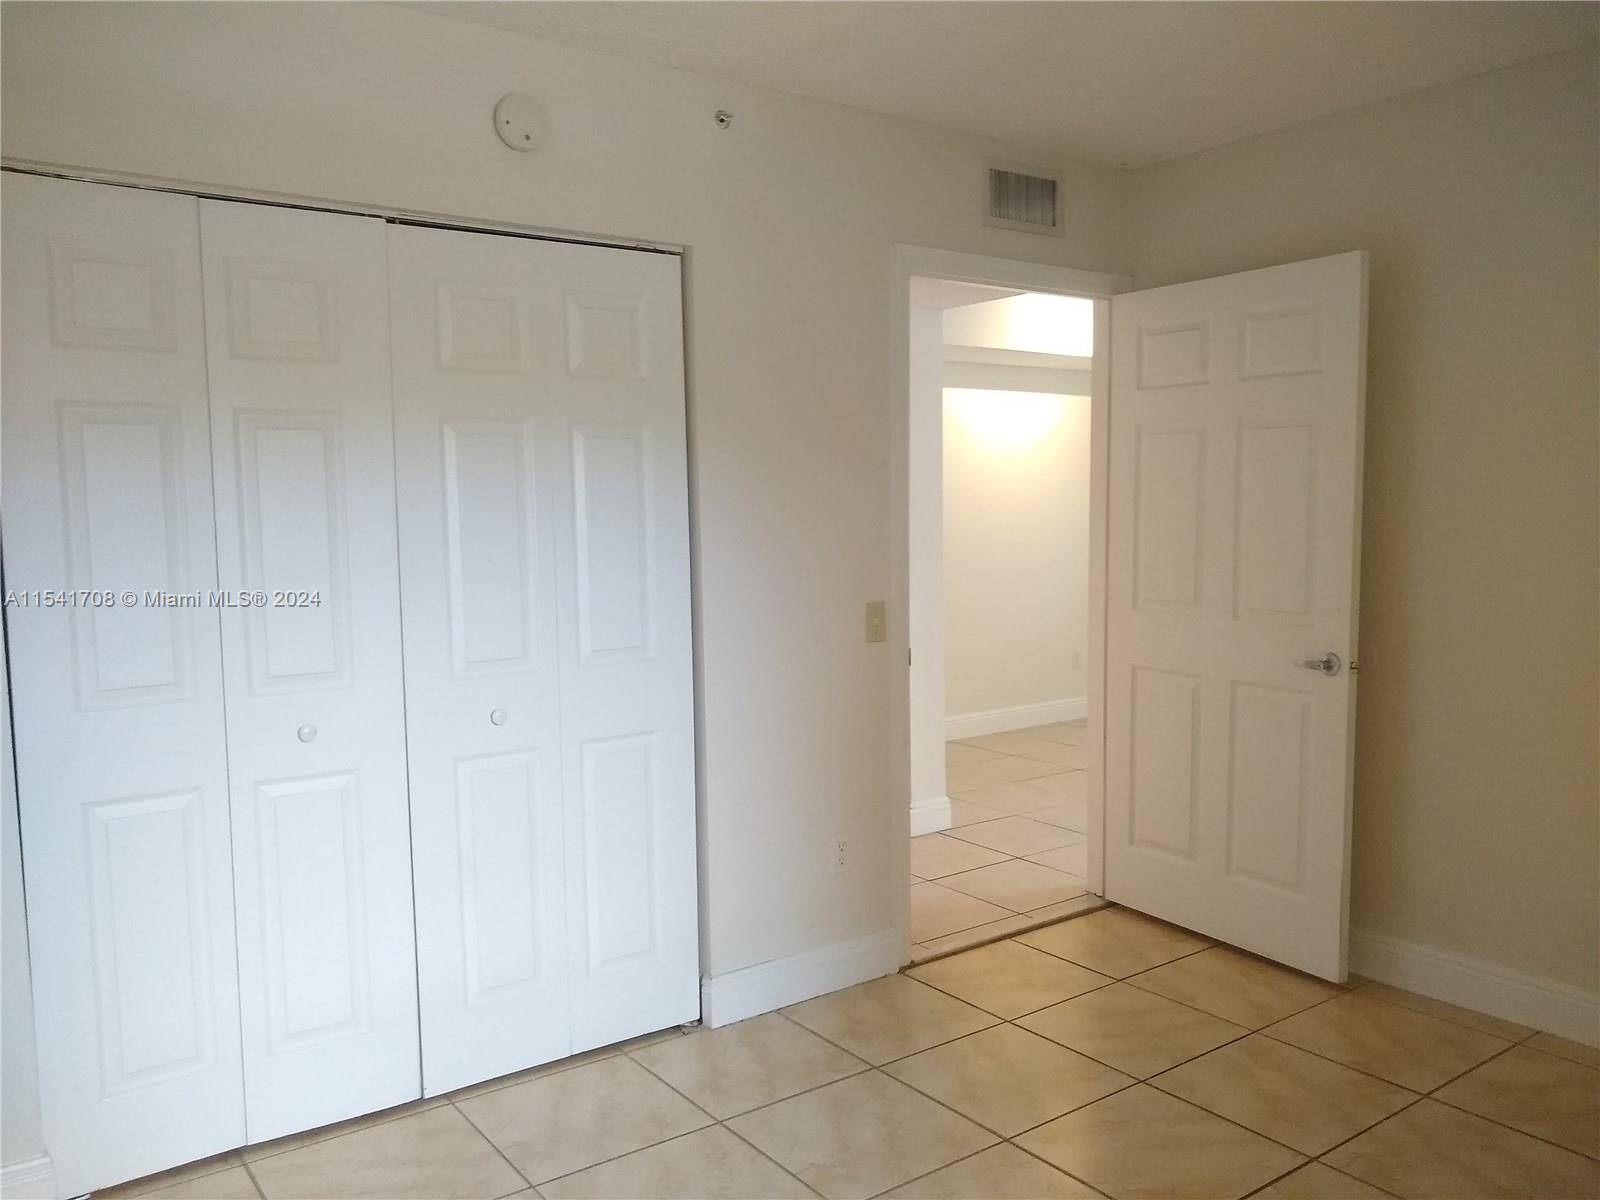 Beautiful condo in LA VIA, INVESTORS friendly community, 2 bedrooms and 2 bathrooms, balcony, tile floor, washer dryer inside unit, gated community located in the heart of Pembroke Pines, water ...